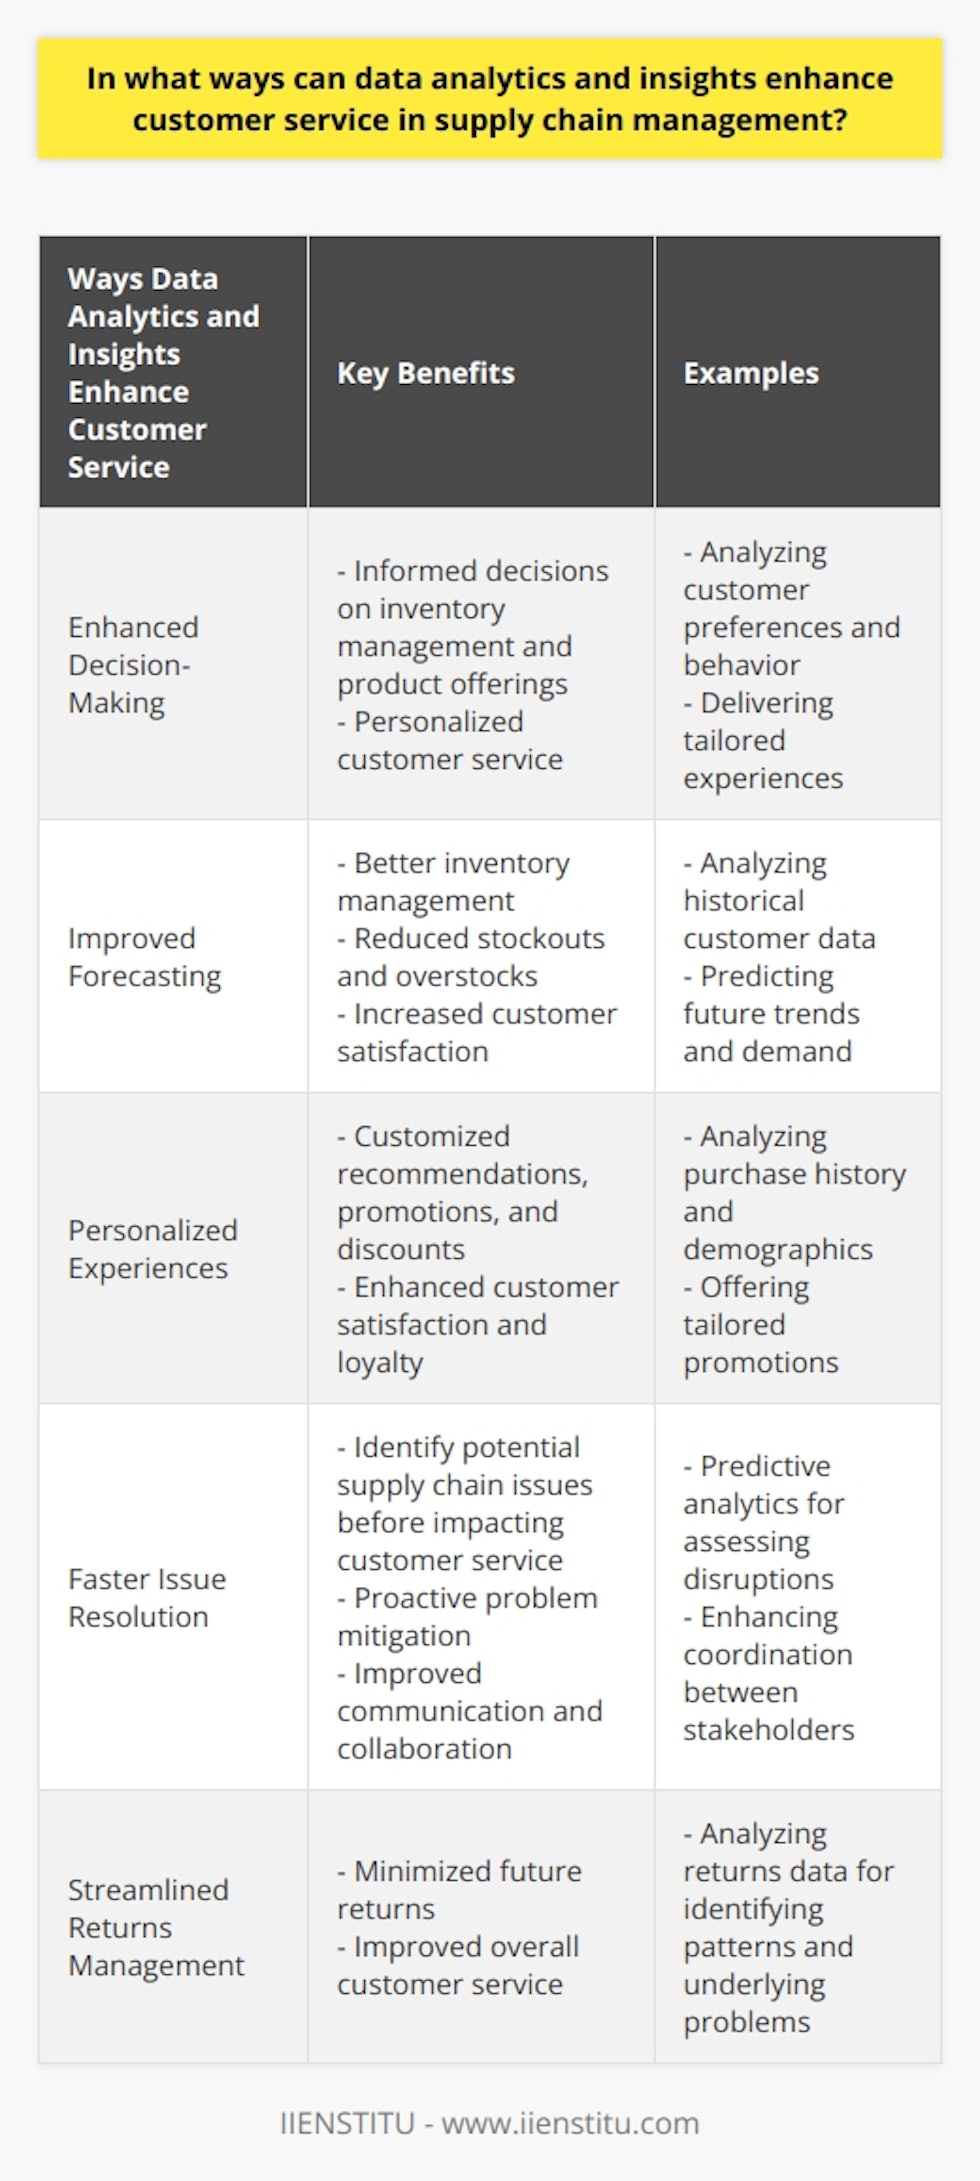 Data analytics and insights play a crucial role in enhancing customer service in supply chain management. By harnessing the power of data, businesses can make informed decisions, improve forecasting, provide personalized experiences, resolve issues promptly, and streamline returns management.One of the key advantages of data analytics is its ability to enhance decision-making within the supply chain. By analyzing customer preferences, buying patterns, and behavior, businesses gain valuable insights into what customers want and need. This information enables them to deliver personalized customer service and make informed decisions regarding inventory management and product offerings.Improved forecasting is another significant benefit of data analytics in supply chain management. By analyzing historical customer data, businesses can predict future trends and demand, allowing for better inventory management. This reduces the risk of stockouts or overstocks, ensuring that products are available when needed. Ultimately, accurate forecasting leads to increased customer satisfaction and optimized supply chain operations.Personalization is a crucial aspect of customer service, and data insights enable businesses to create tailored experiences that cater to individual preferences. By analyzing data such as purchase history, demographics, and online behavior, companies can offer personalized recommendations, promotions, and discounts. This level of customization enhances customer satisfaction and encourages loyalty.Data analytics also plays a vital role in faster issue resolution. Advanced analytics can identify potential issues in the supply chain before they impact customer service. Predictive analytics can assess the likelihood of disruptions, enabling companies to proactively address and mitigate problems. Additionally, data insights help improve communication and collaboration between stakeholders in the supply chain, enhancing overall coordination and service levels.Returns management is a critical aspect of customer service, and data analytics can significantly streamline and automate this process. By analyzing returns data, businesses can identify patterns and trends, pinpointing underlying problems in the supply chain, product design, or manufacturing. This proactive approach helps minimize future returns and enhances overall customer service.In conclusion, data analytics and insights are powerful tools for enhancing customer service in supply chain management. Through improved decision-making, forecasting, personalization, issue resolution, and returns management, businesses can increase customer satisfaction, loyalty, and ultimately achieve greater success.